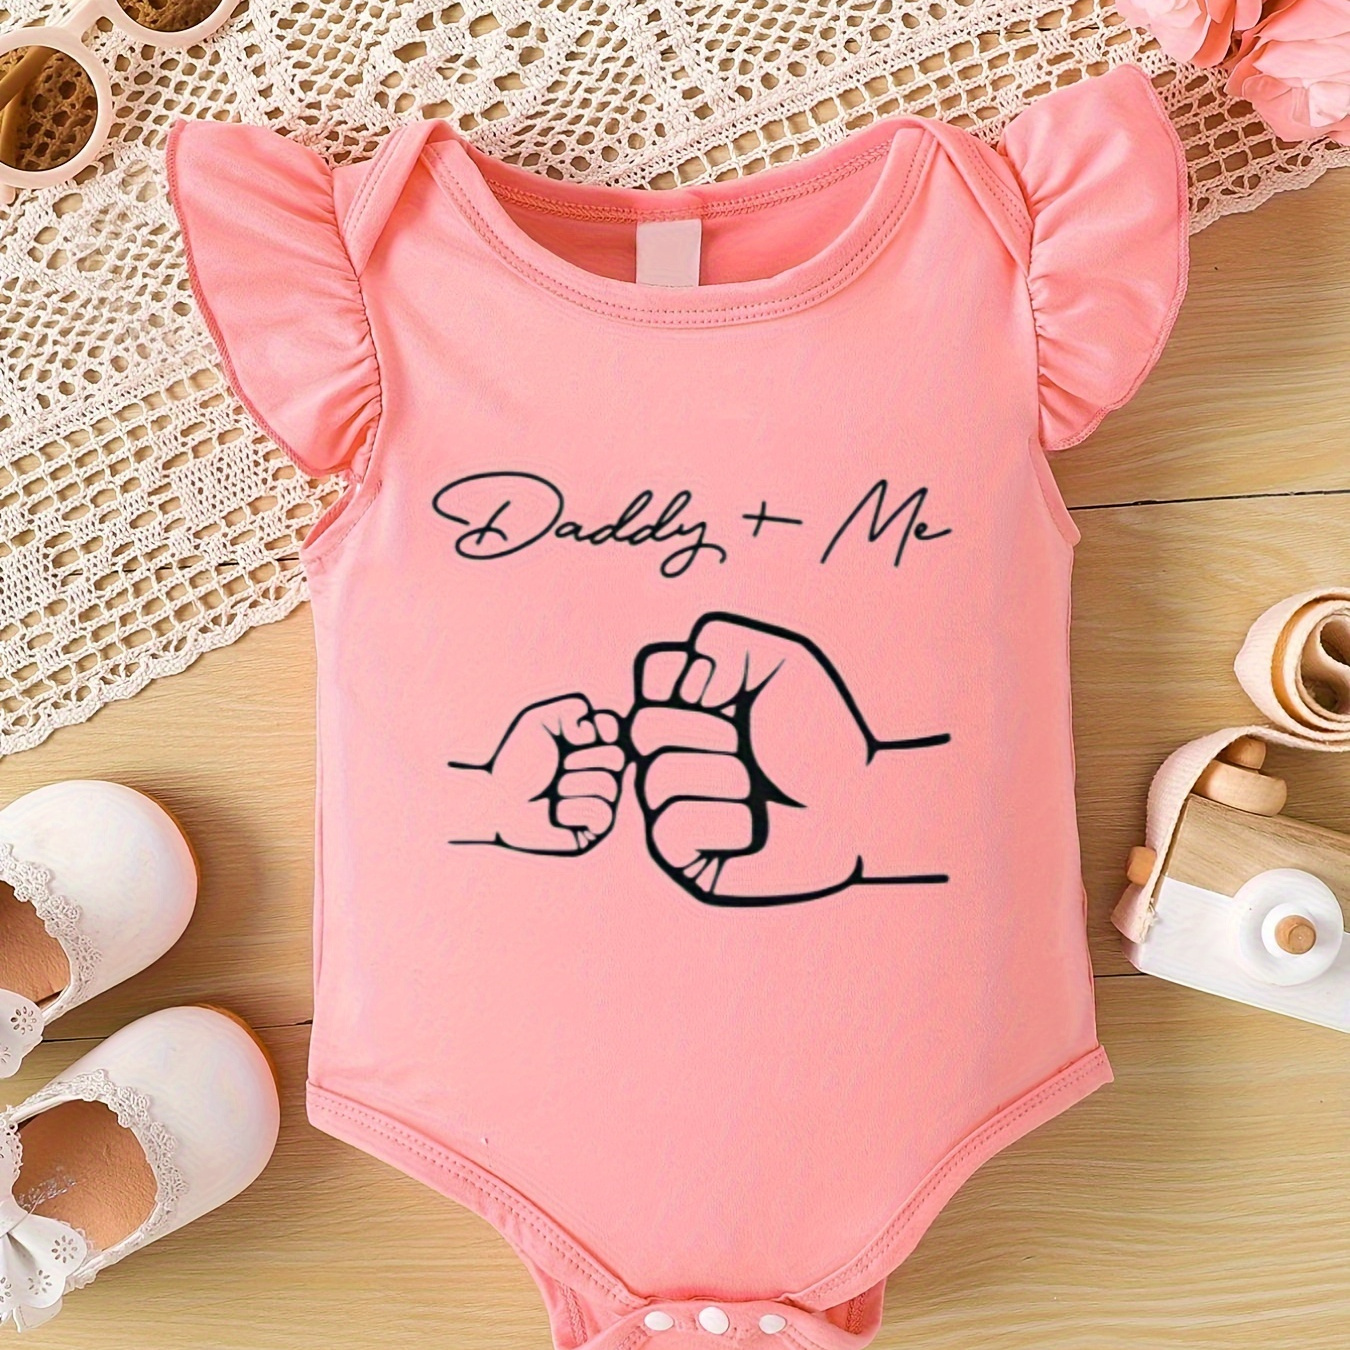 

Baby's "dad+me" Print Triangle Bodysuit, Casual Cap Sleeve Romper, Toddler & Infant Girl's Onesie For Summer, As Gift